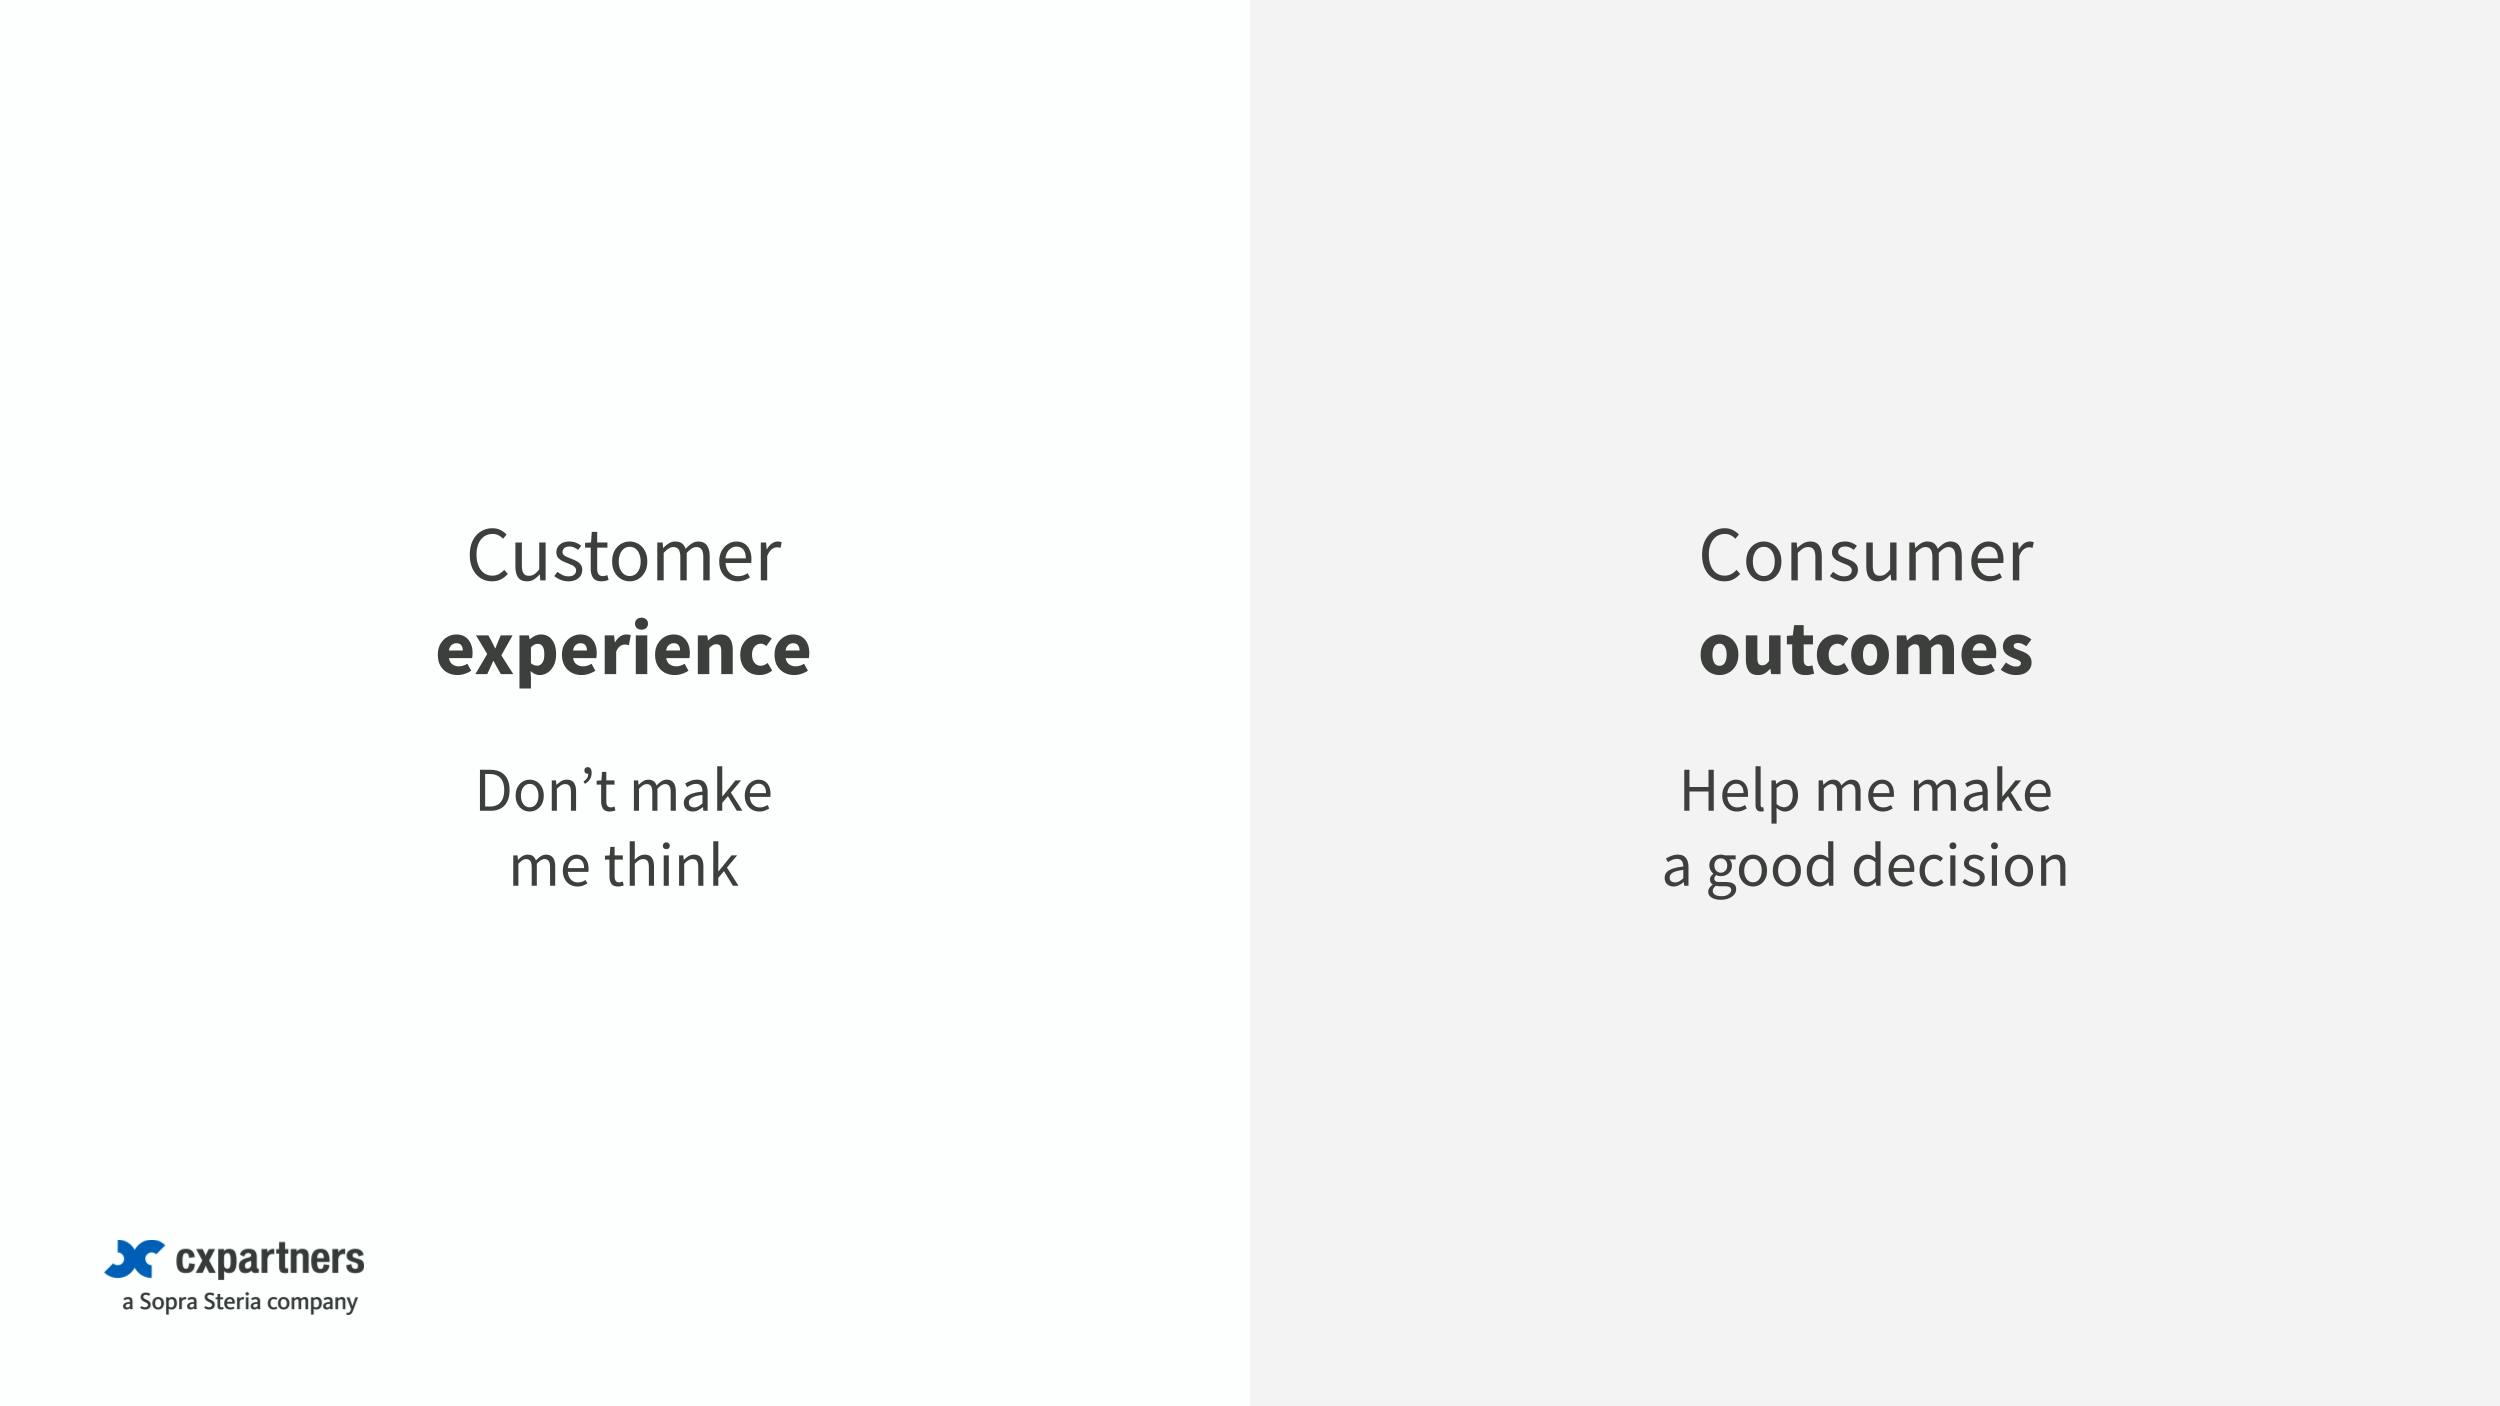 The mantra for designing customer experiences has long been "Don't make me think". When designing for consumer outcomes the user need is different. For example, "Help me make a good decision" might be a better guiding principle..